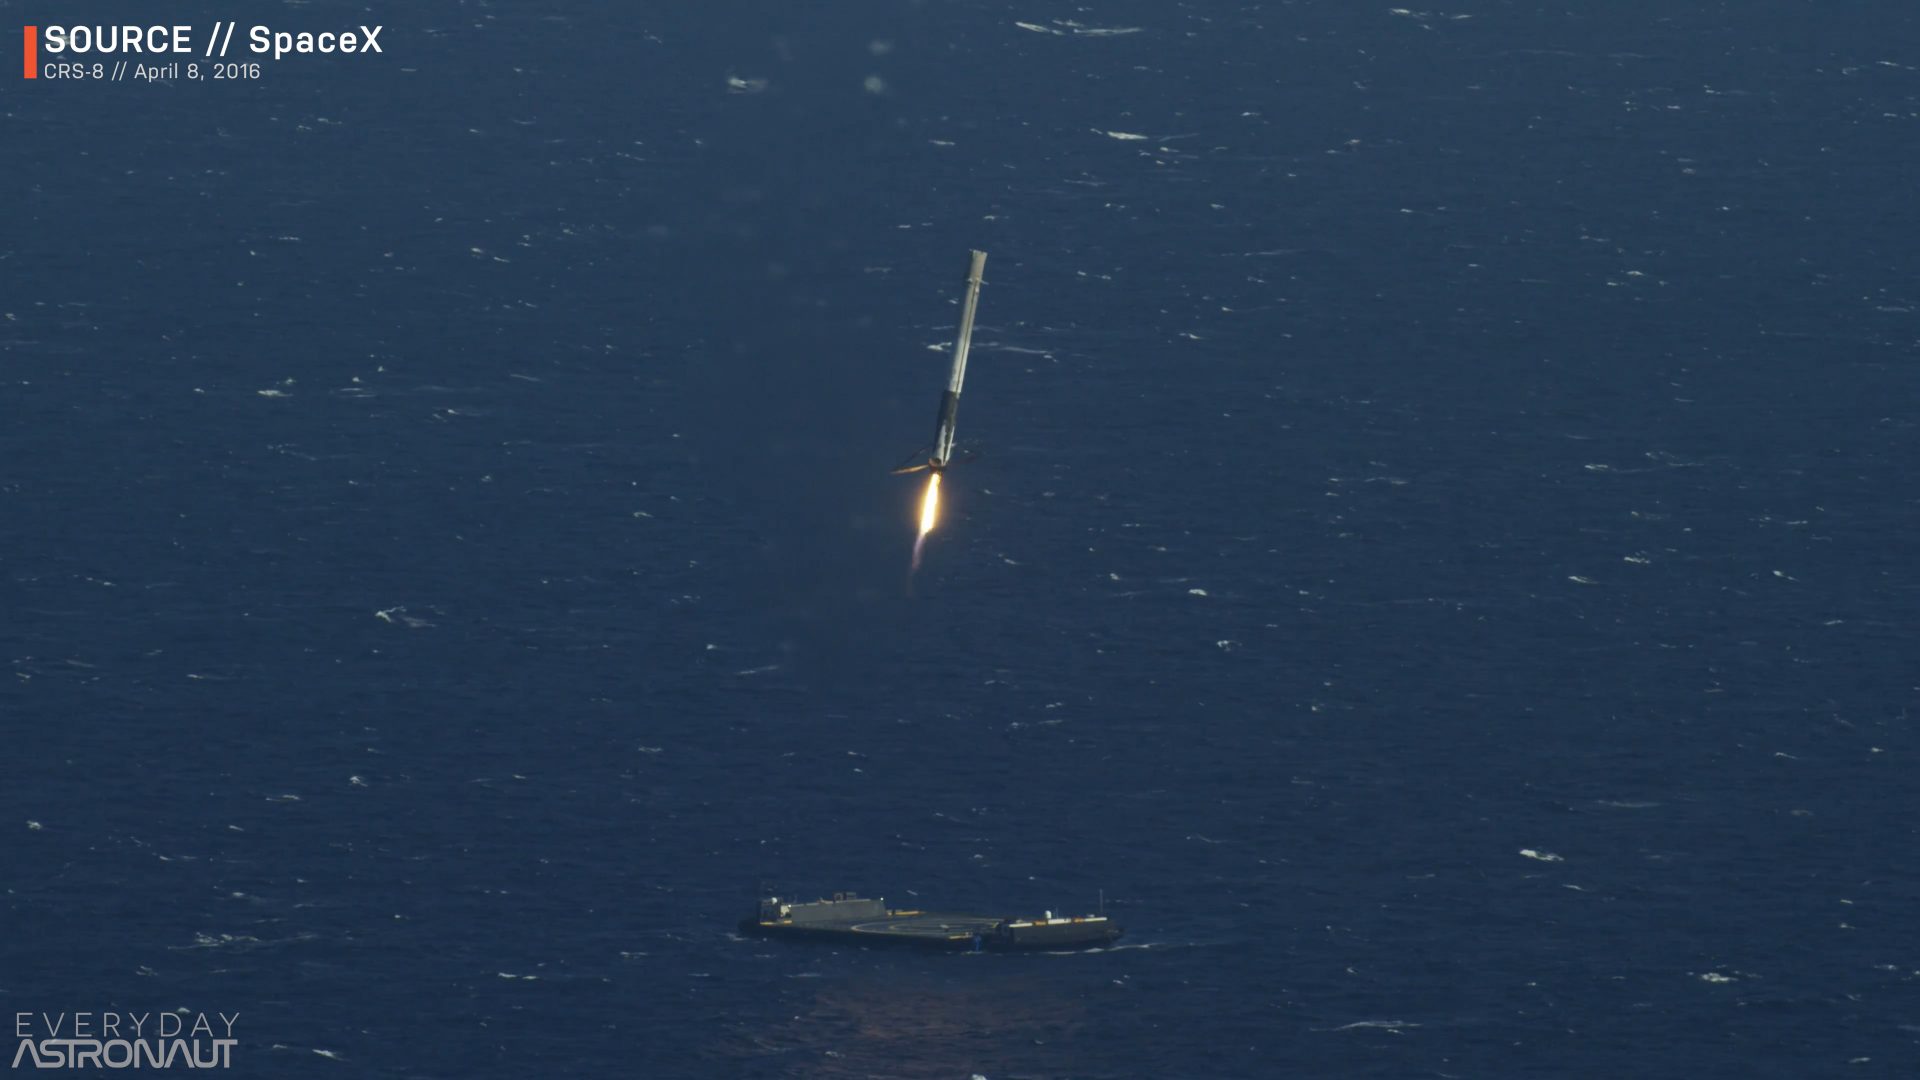 SpaceX CRS-8